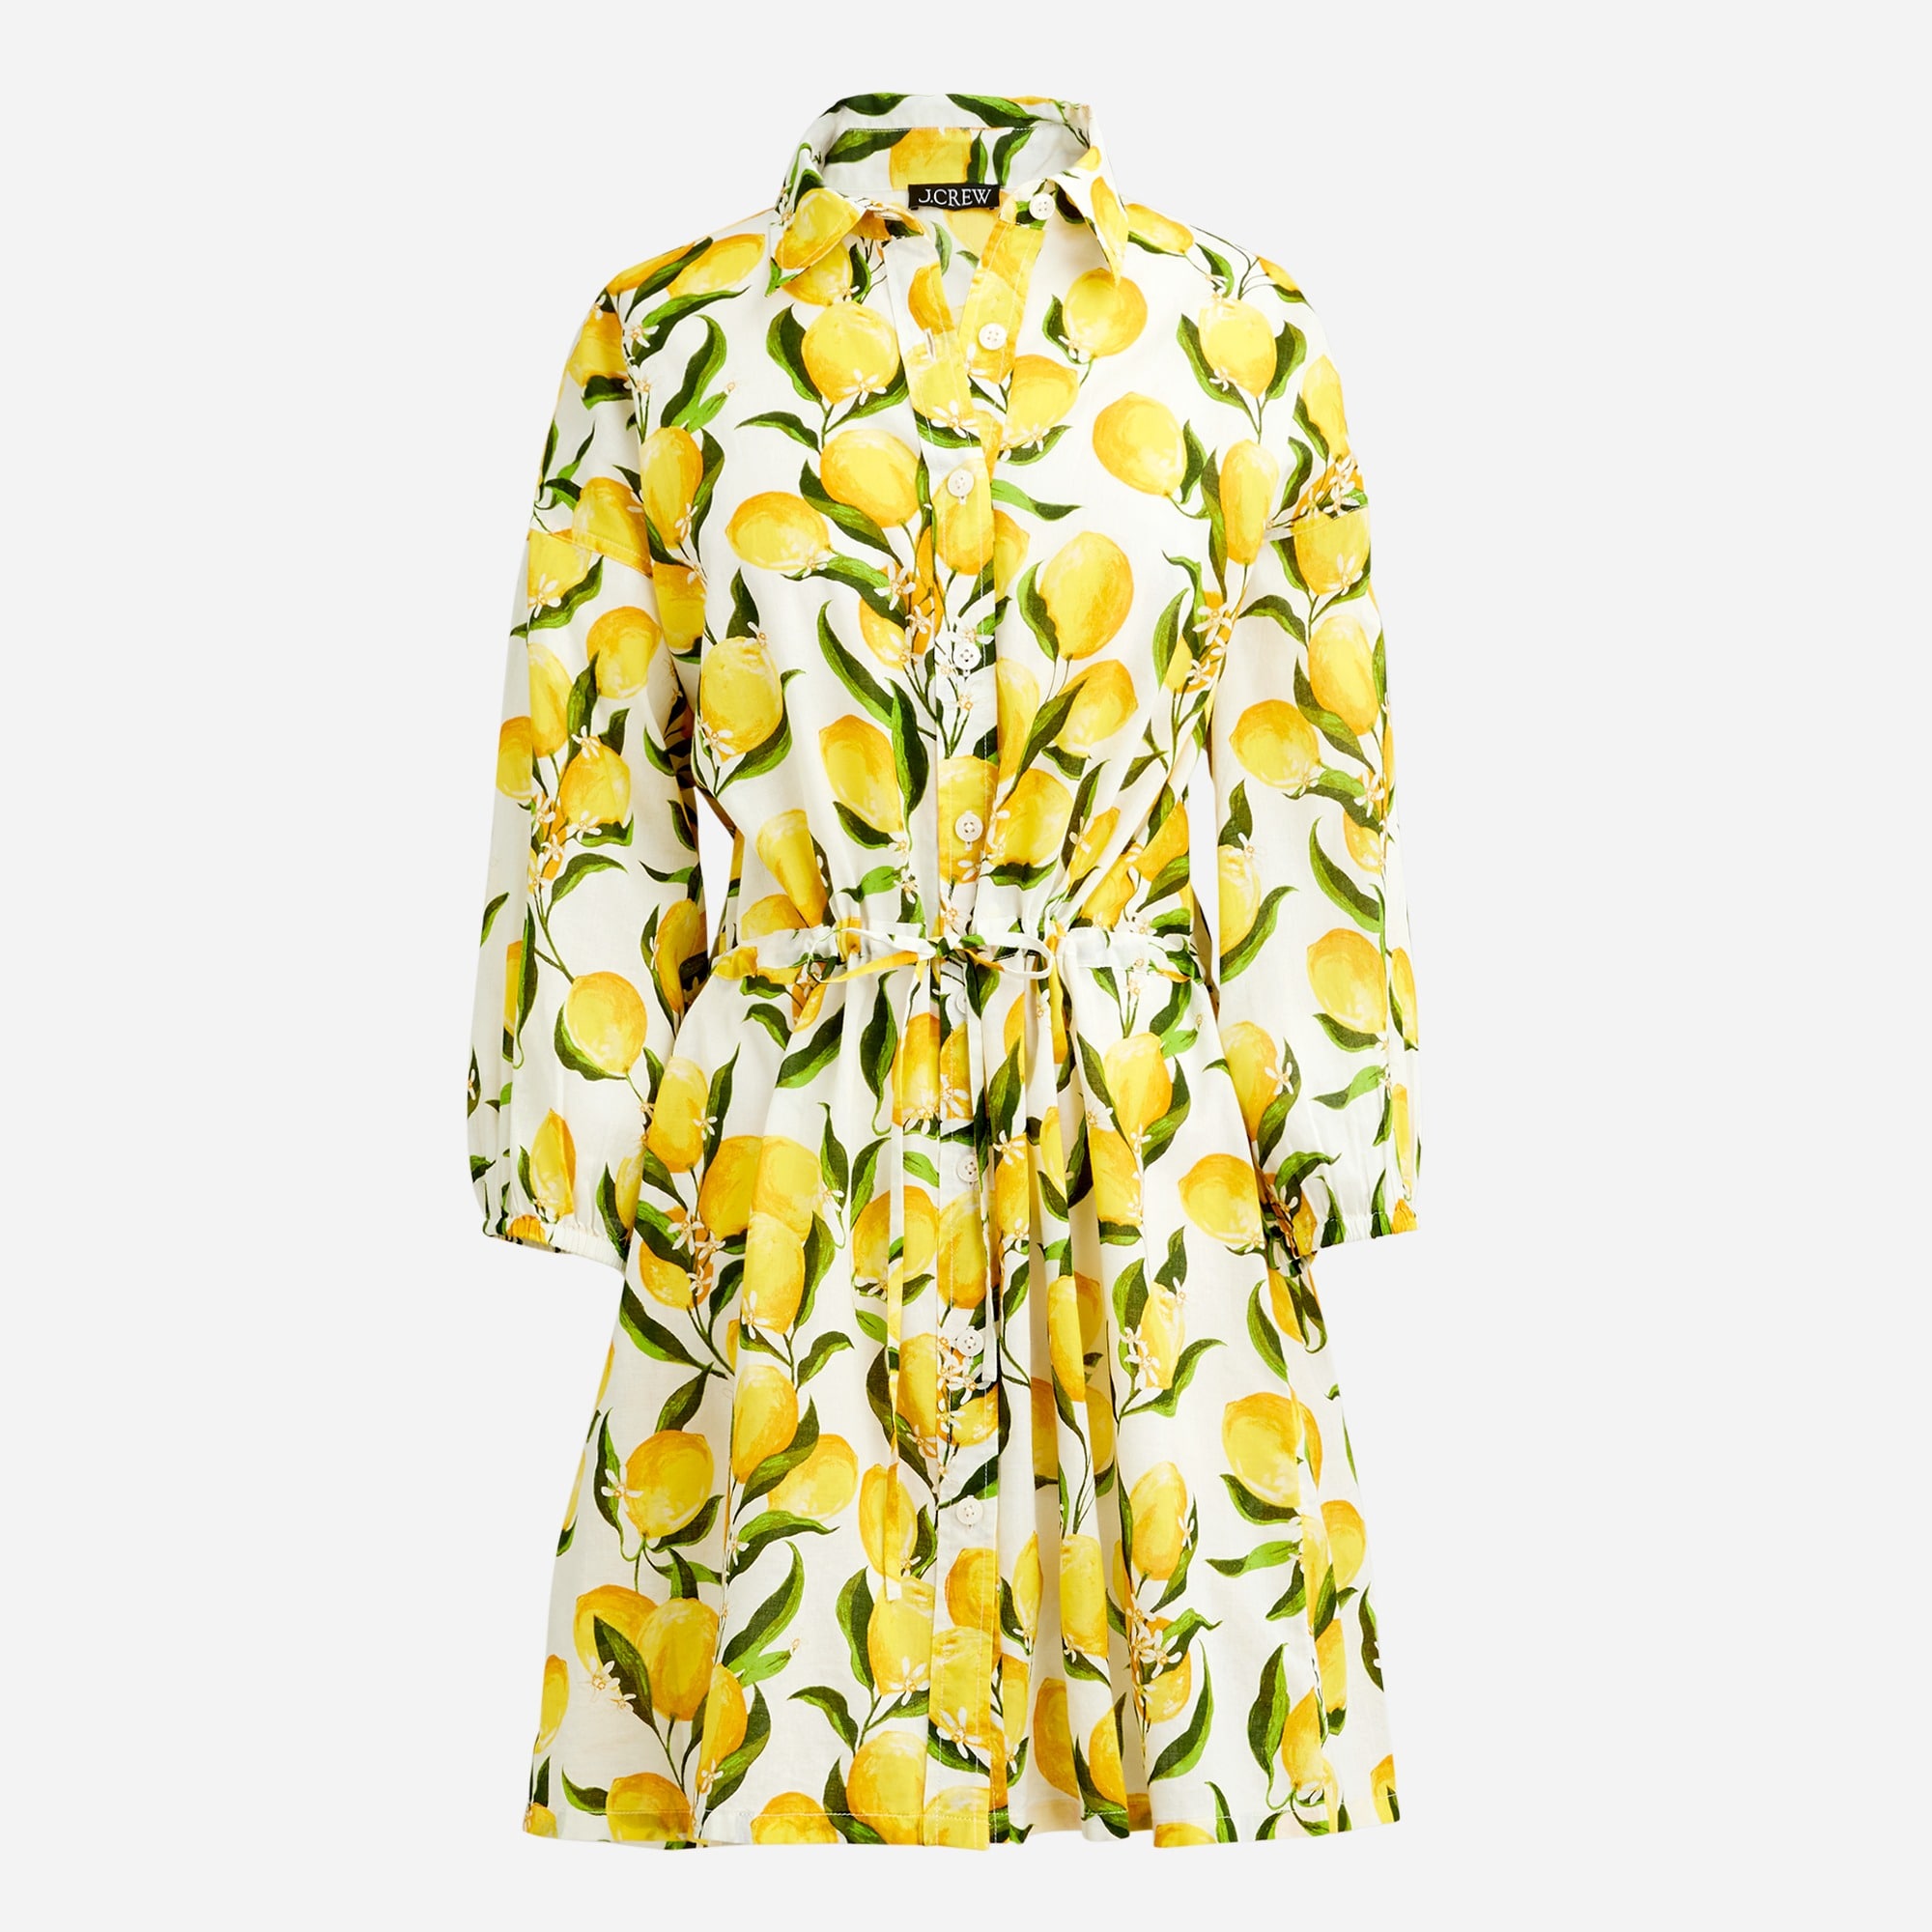  Cinched shirtdress in limoncello